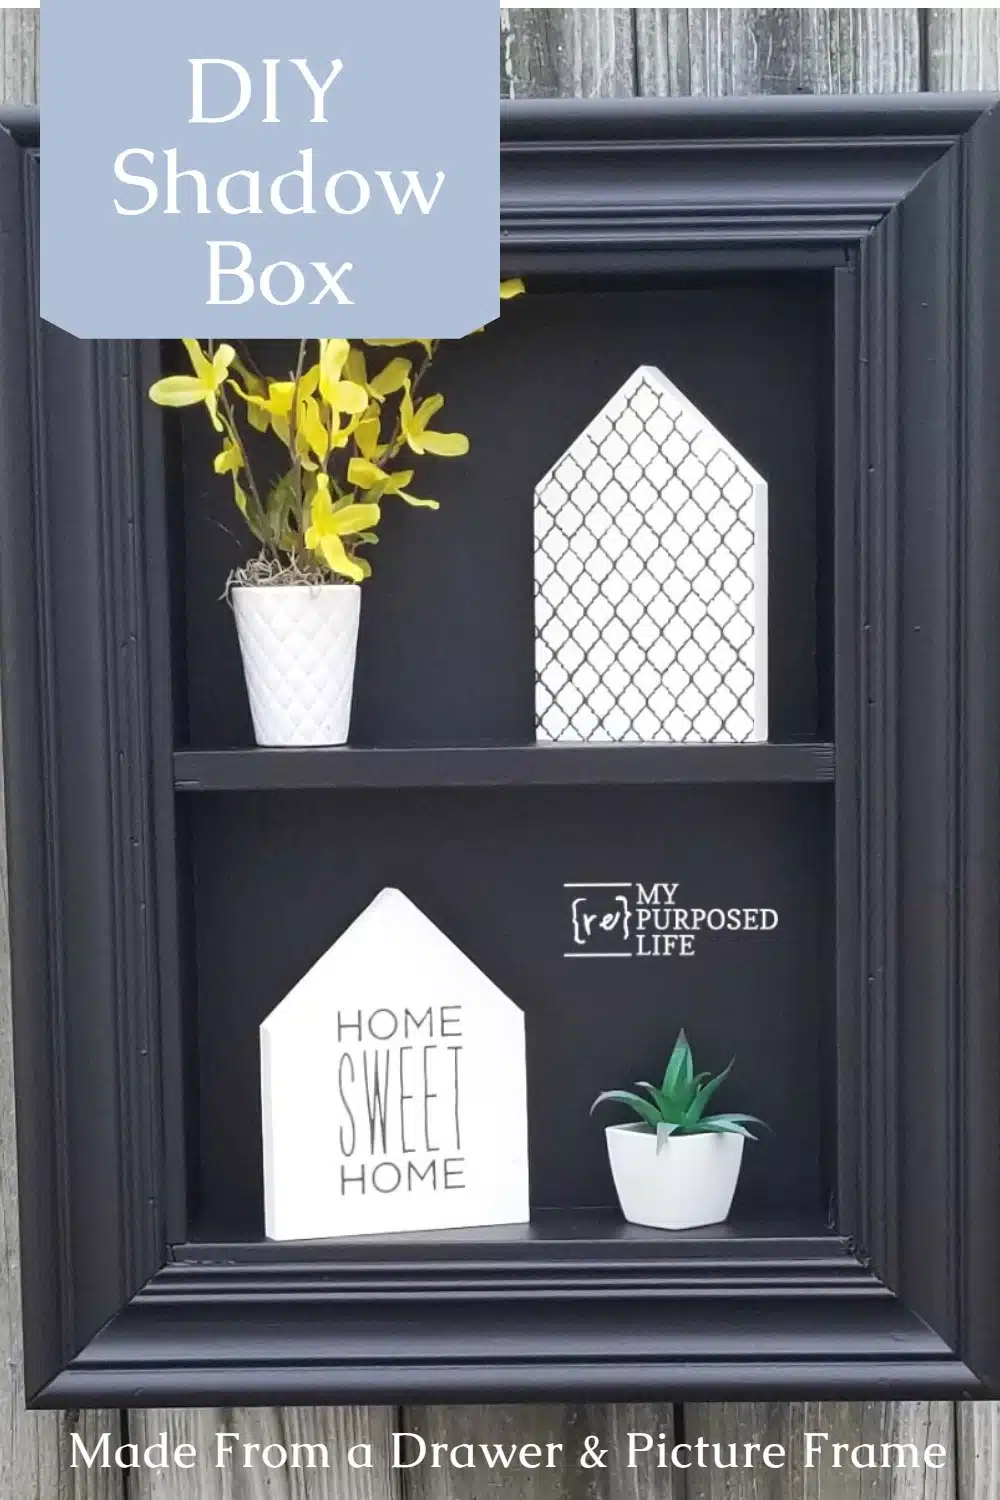 How to use an old drawer and a picture frame to make a shadow box. Step by step directions so you can make this project yourself. The black shadow box looks great with the white decor #MyRepurposedLife #repurposed #drawer #shadowbox #diy #project via @repurposedlife